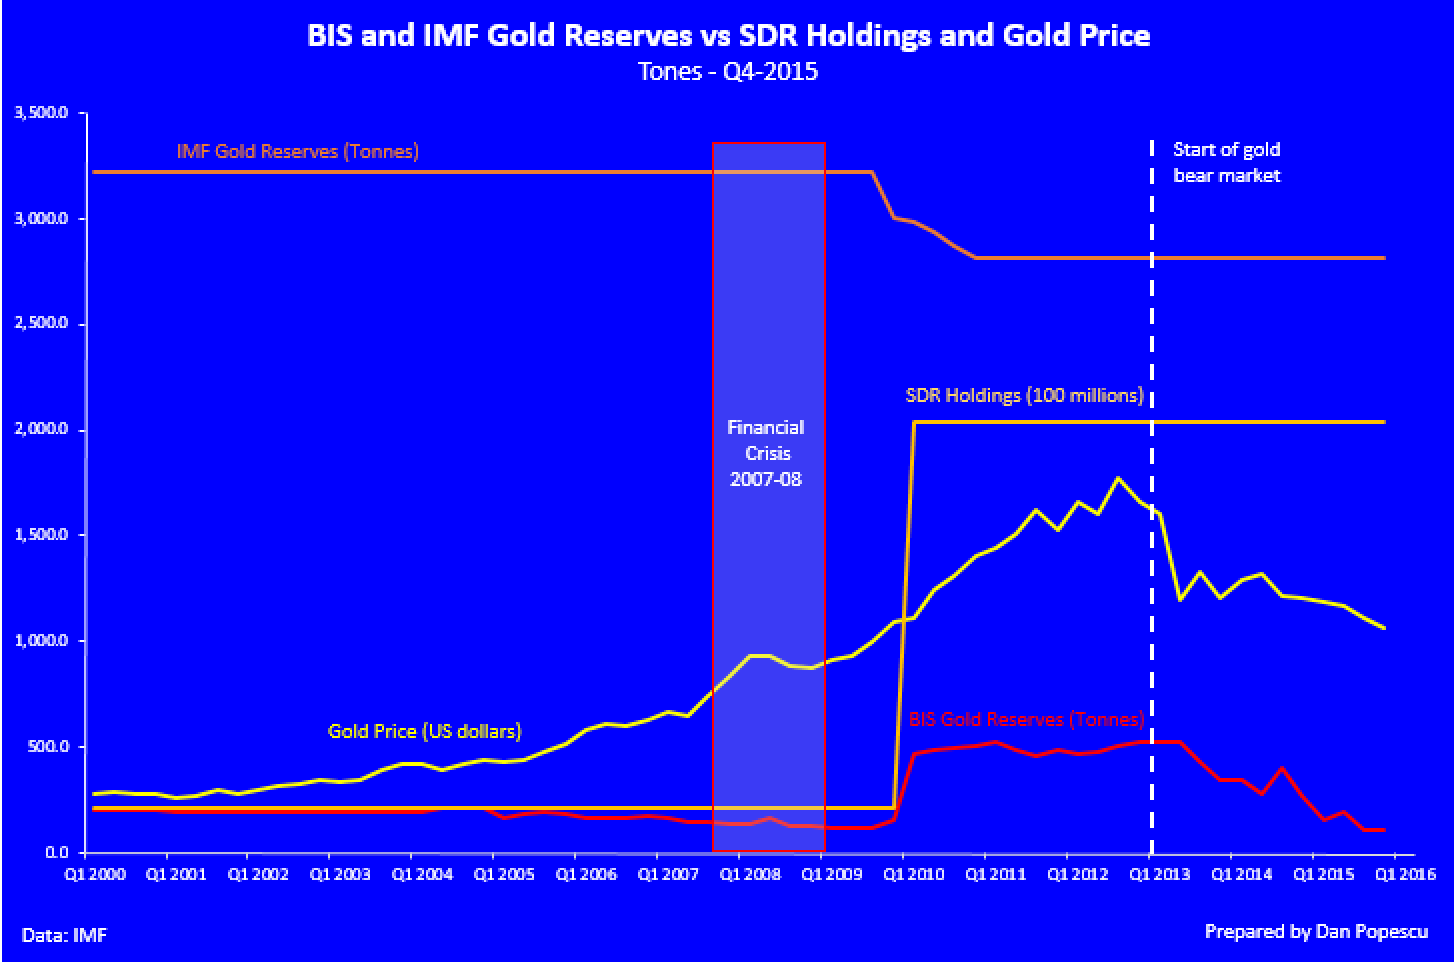 BIS and IMF gold reserves vs SDR holding and gold price